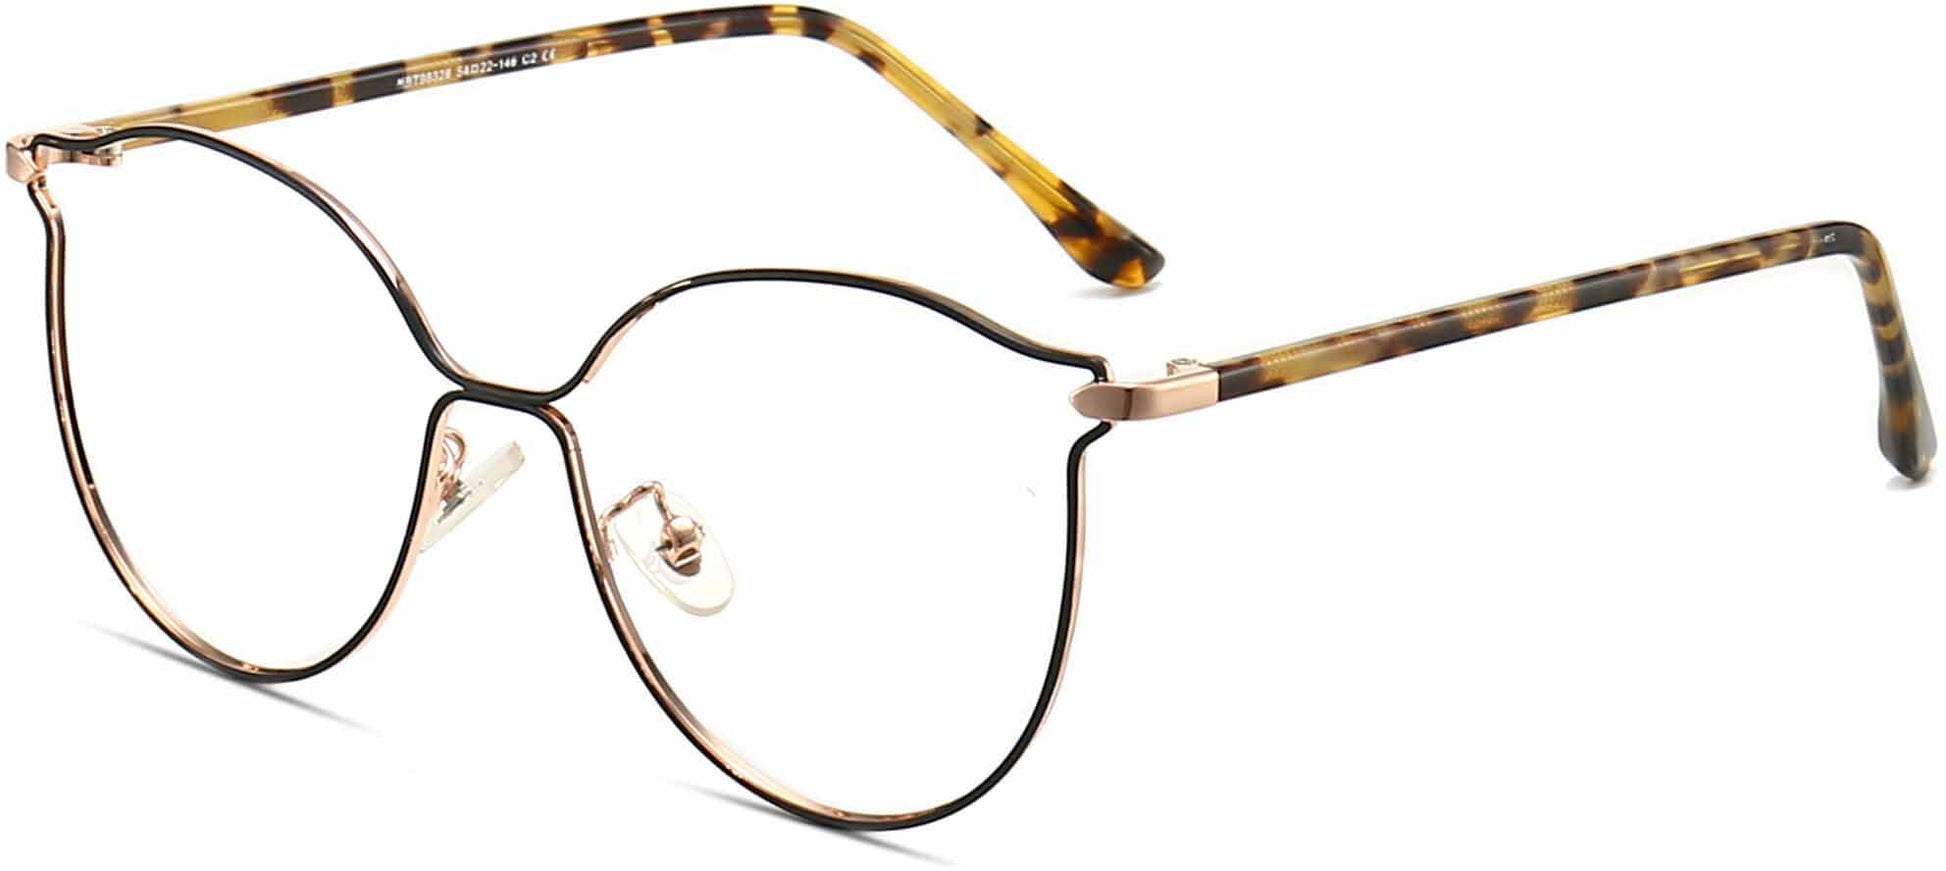 Ryleigh Cateye Black Eyeglasses from ANRRI, angle view